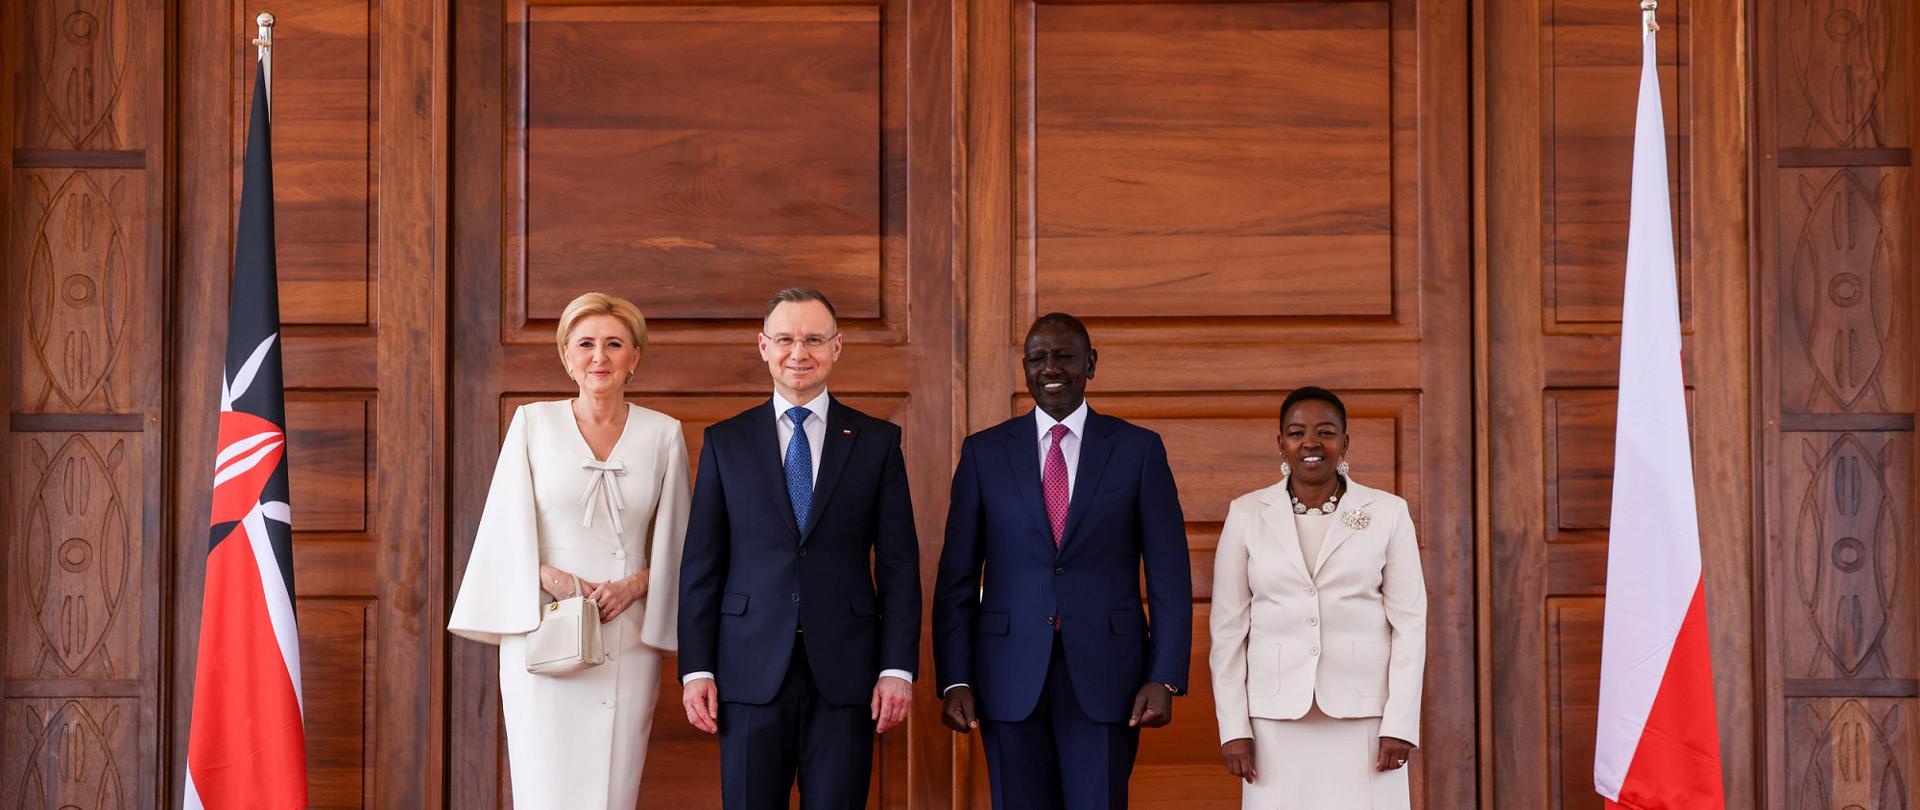 State visit of the President of the Republic of Poland to the Republic of Kenya